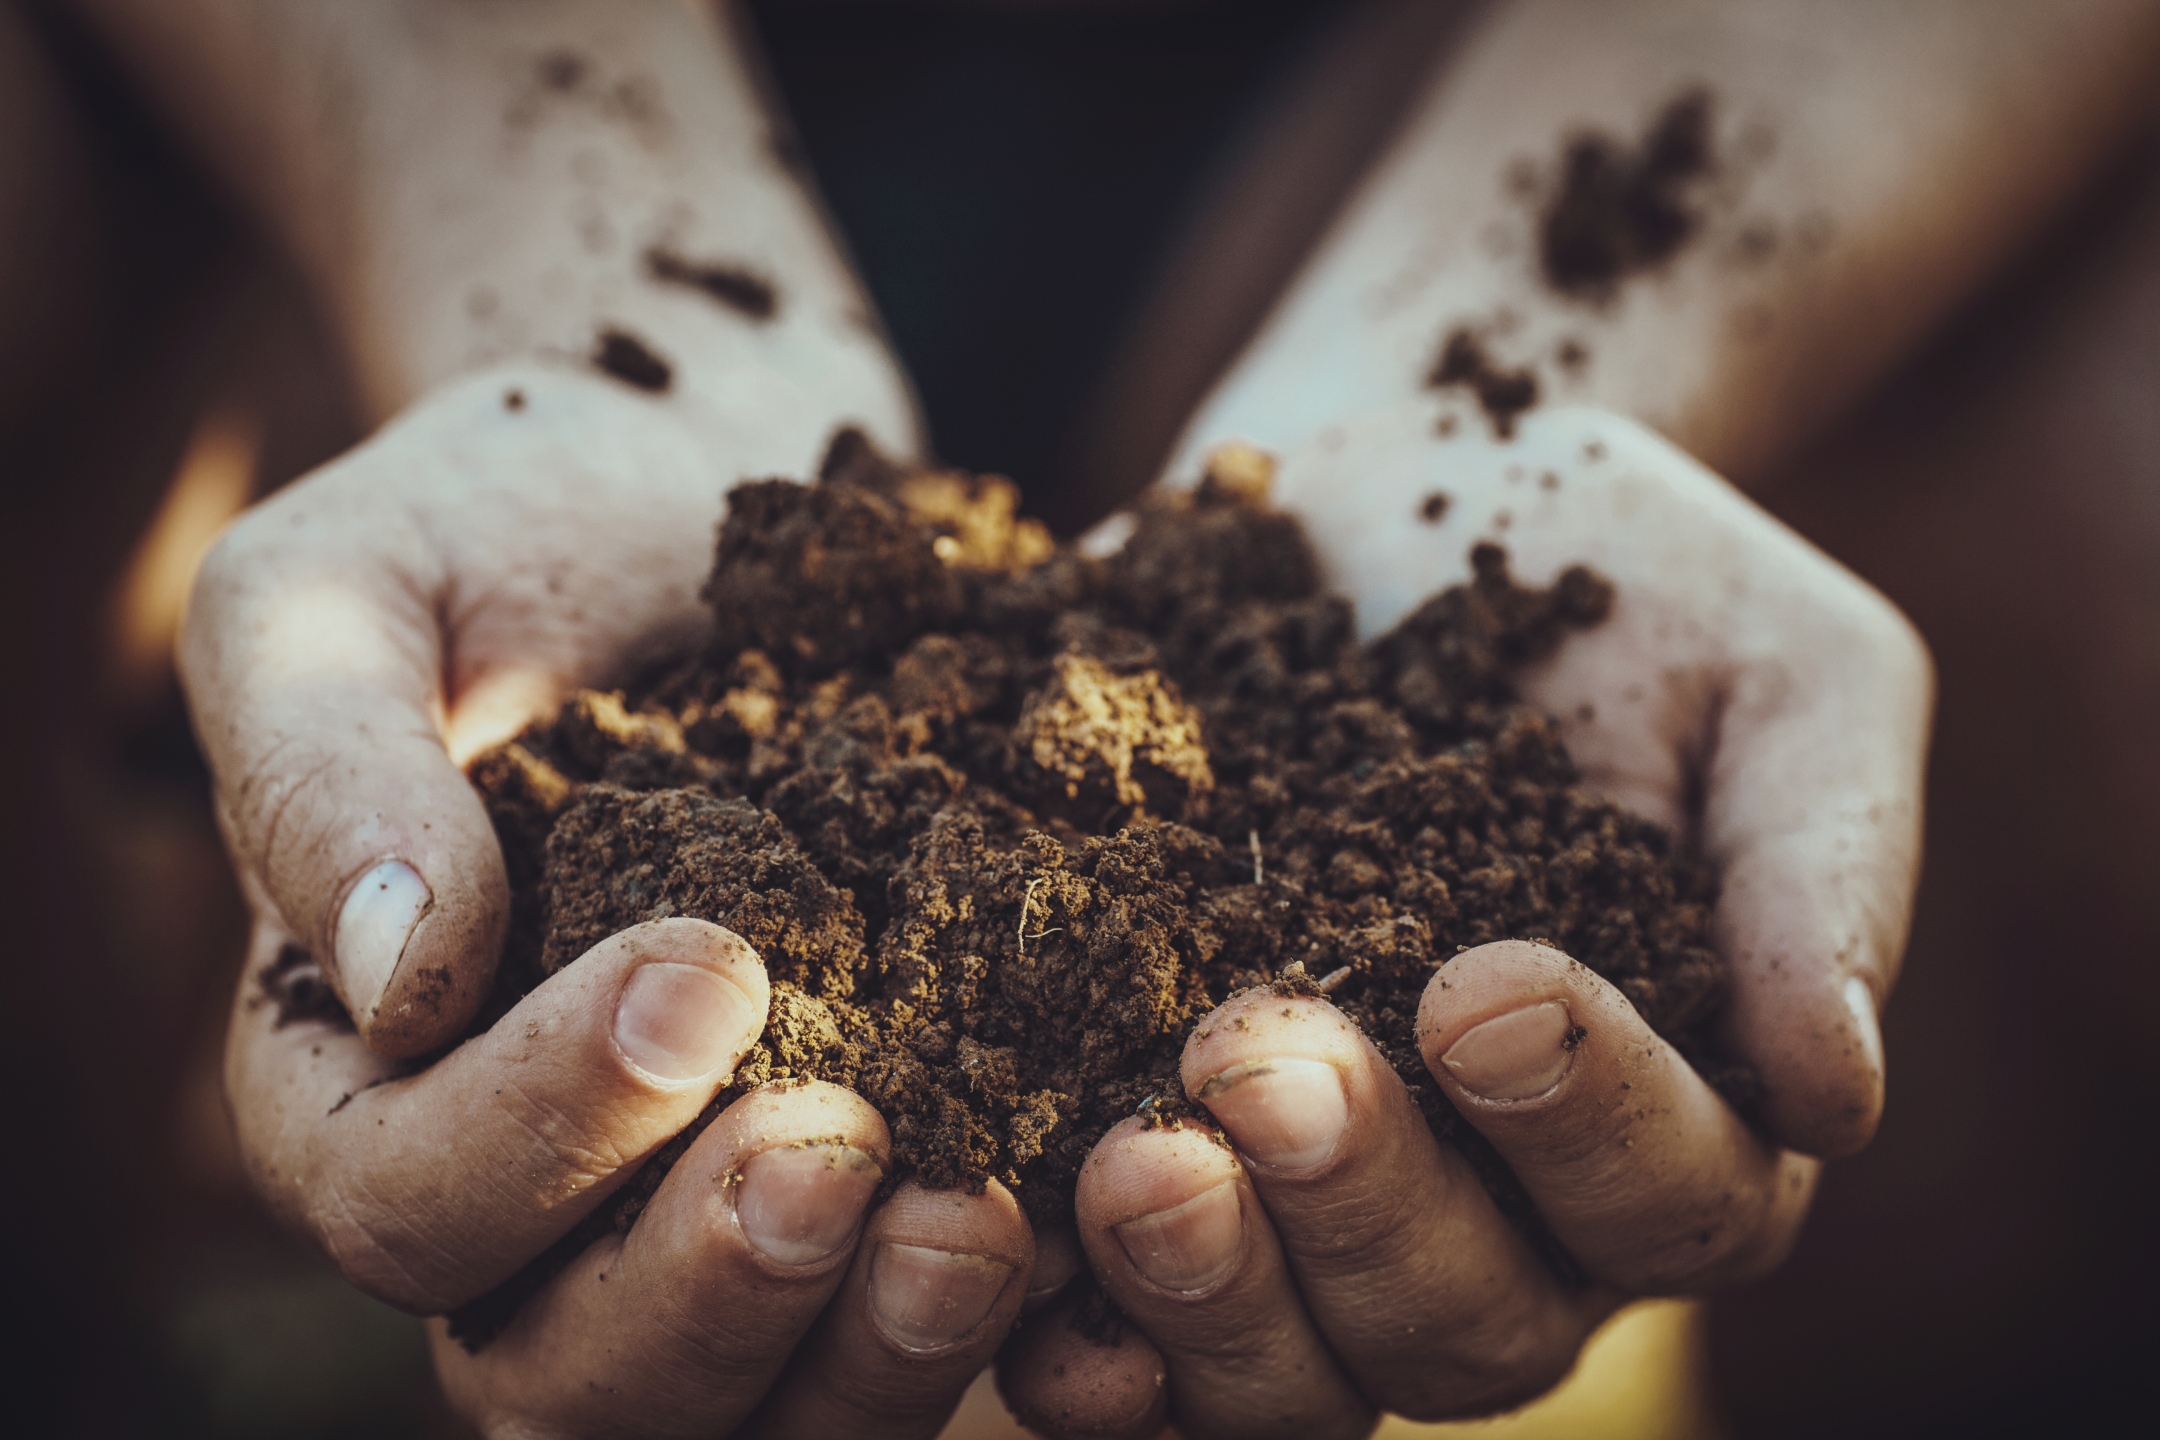 Soil in our Hands